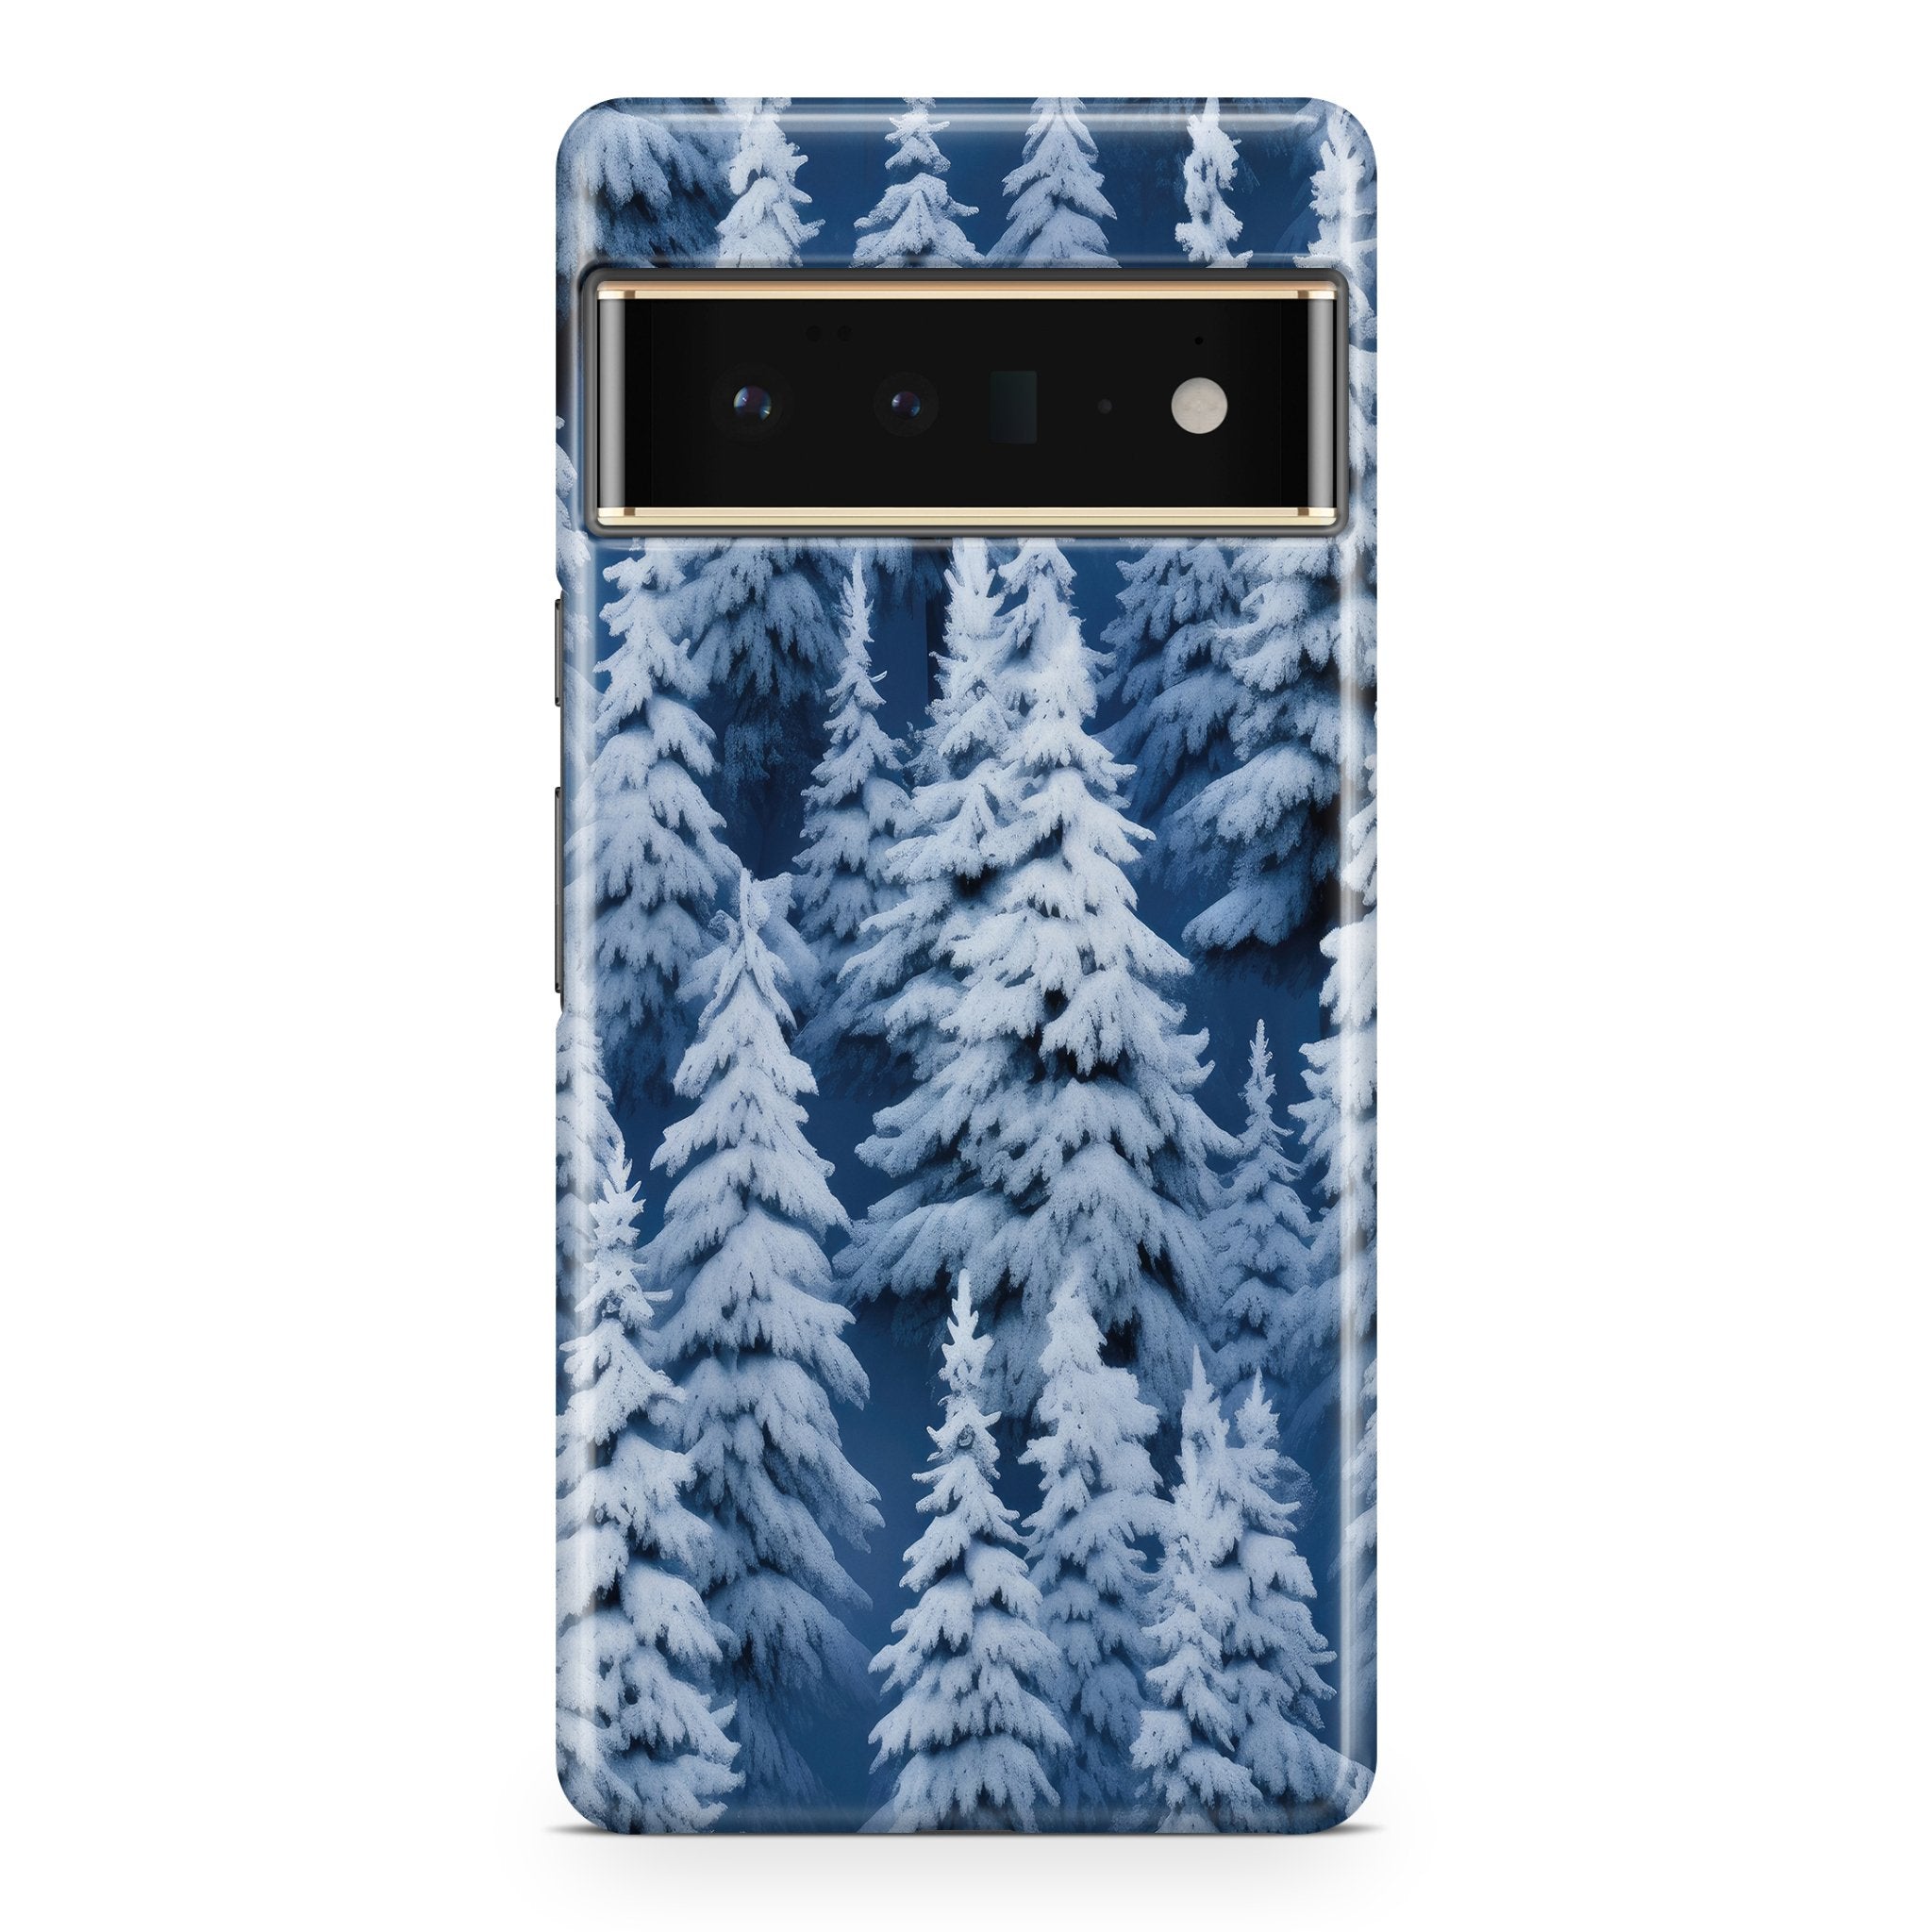 Winter Serenade - Google phone case designs by CaseSwagger